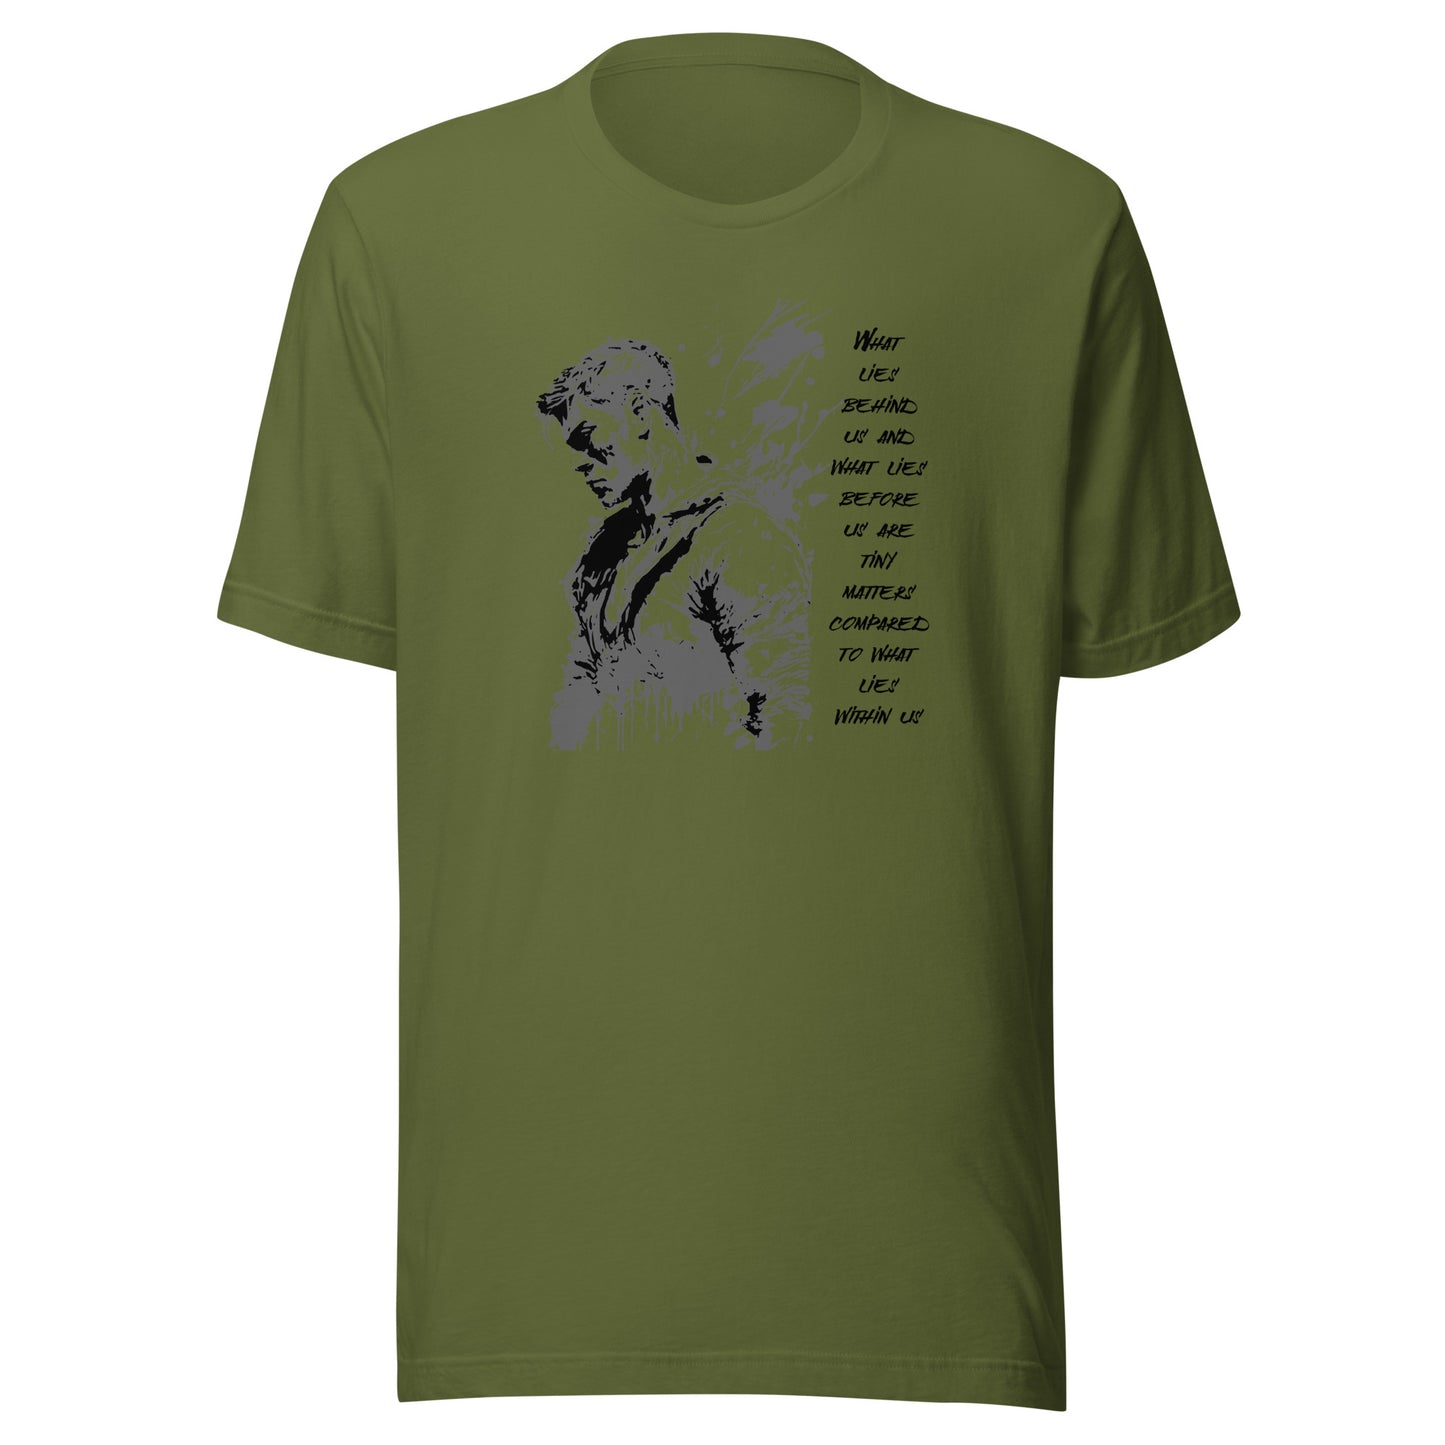 What Lies Within Us Men's Graphic T-Shirt Olive